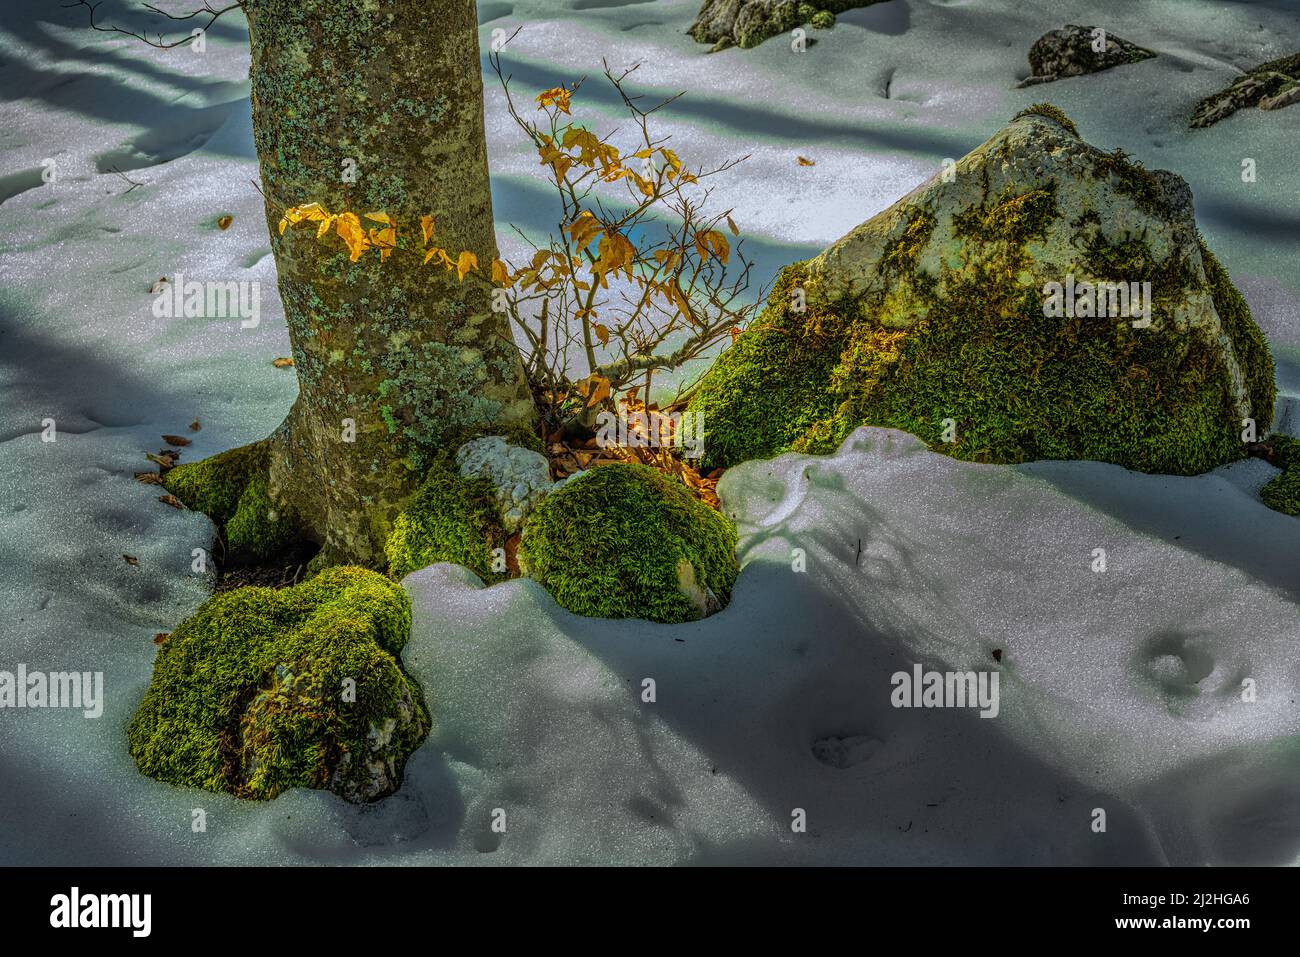 Beech trunk with yellow leaves, ground with snow and rocks covered with moss. Maiella National Park, Abruzzo, Italy, Europe Stock Photo